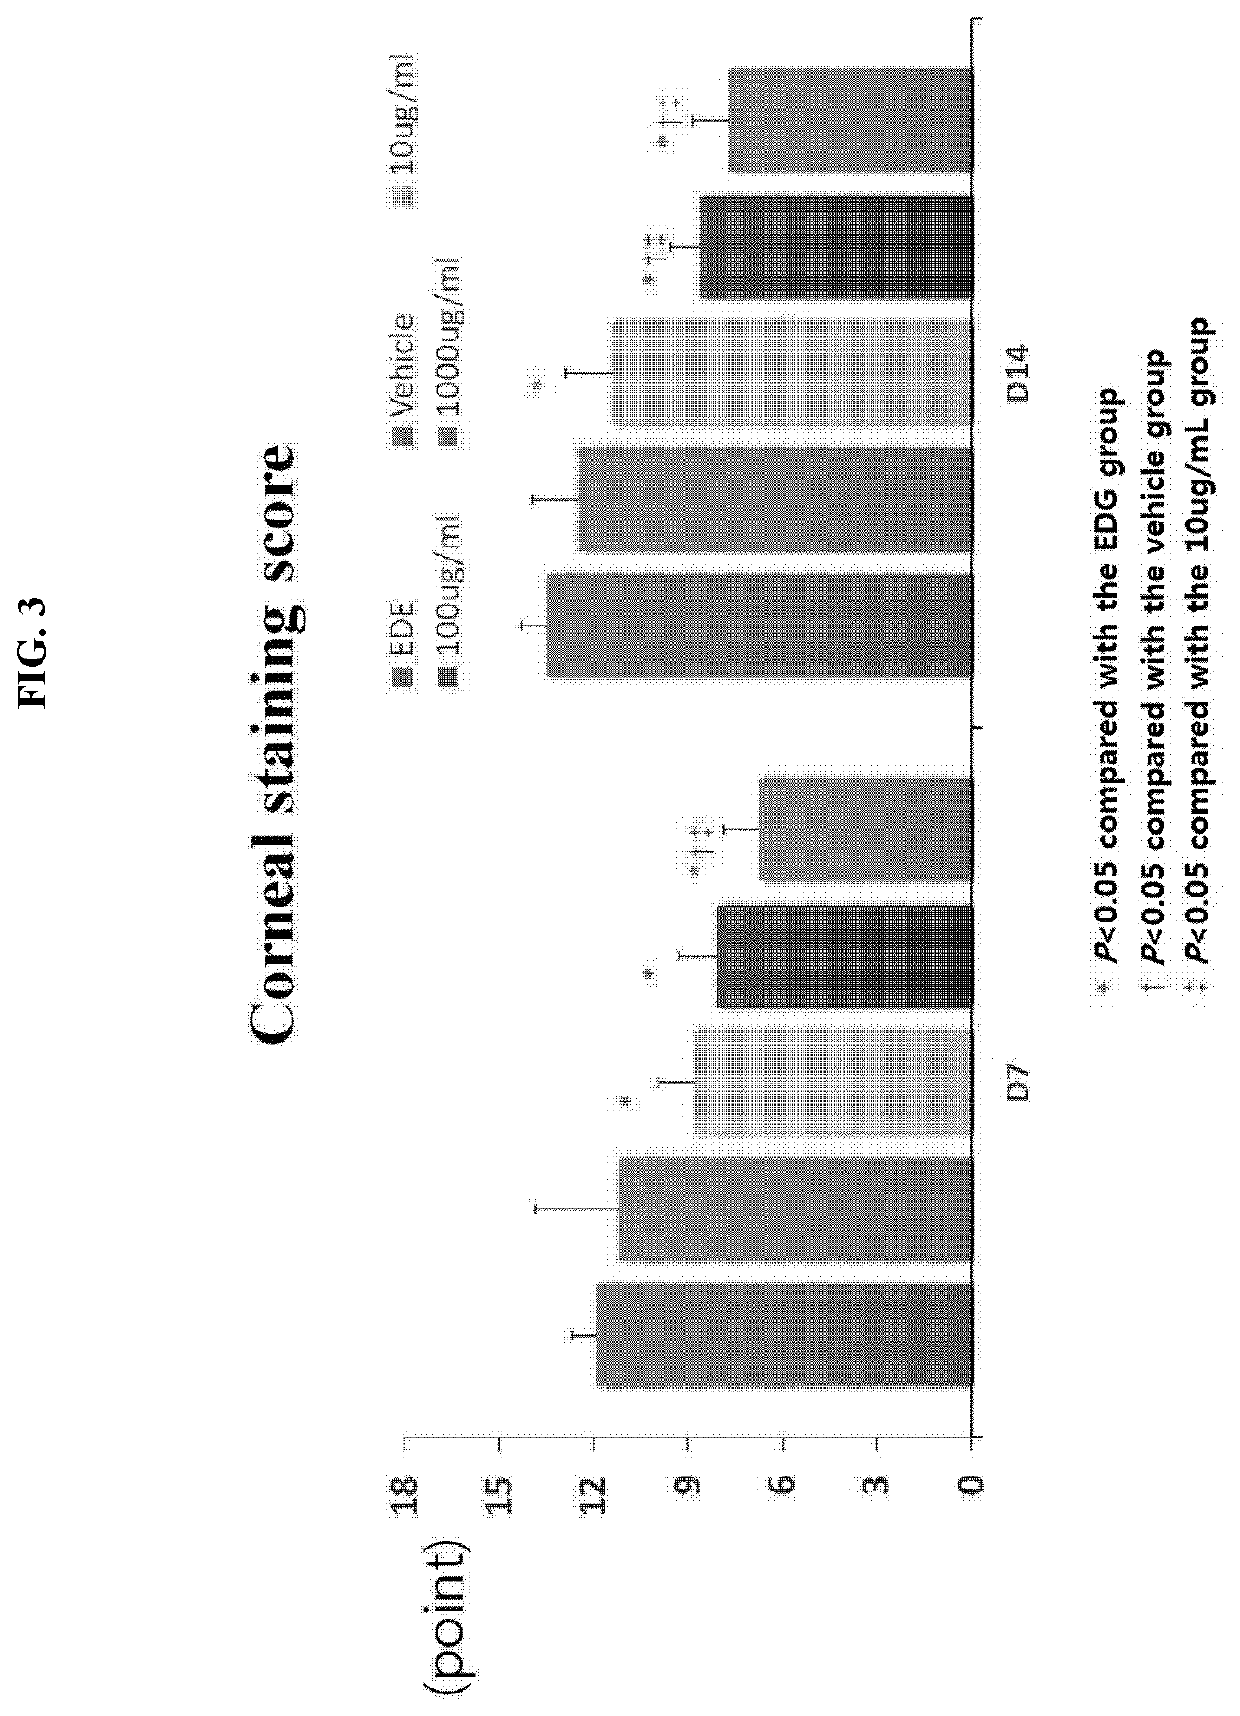 Pharmaceutical composition containing gly-thymosin beta-4 (gly-tb4) for treatment of dry eye